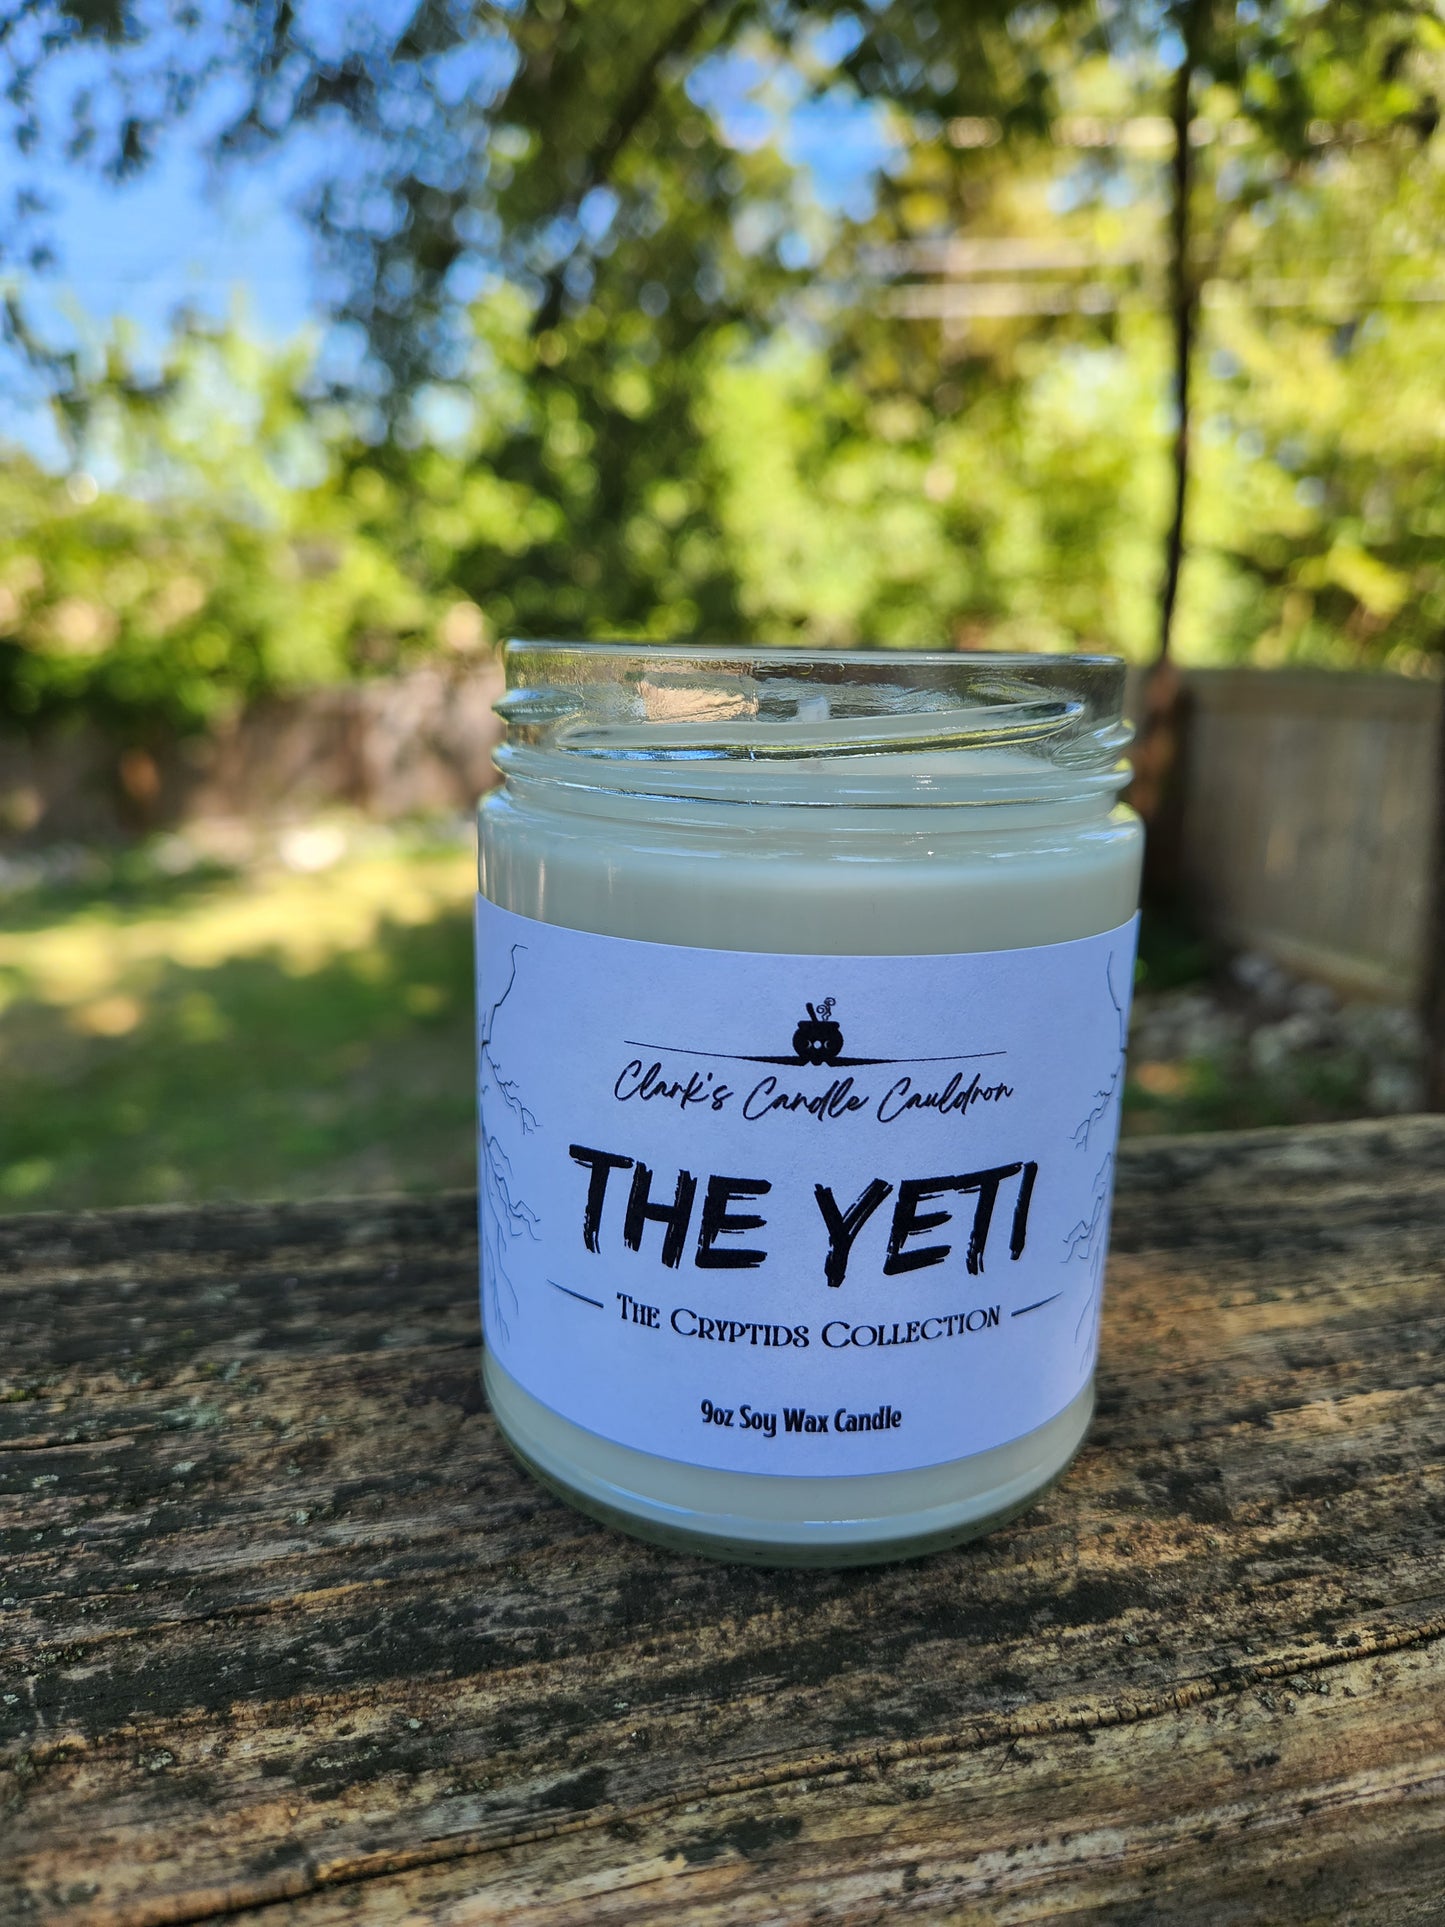 The Yeti - 9oz 100% Soy Wax Candle